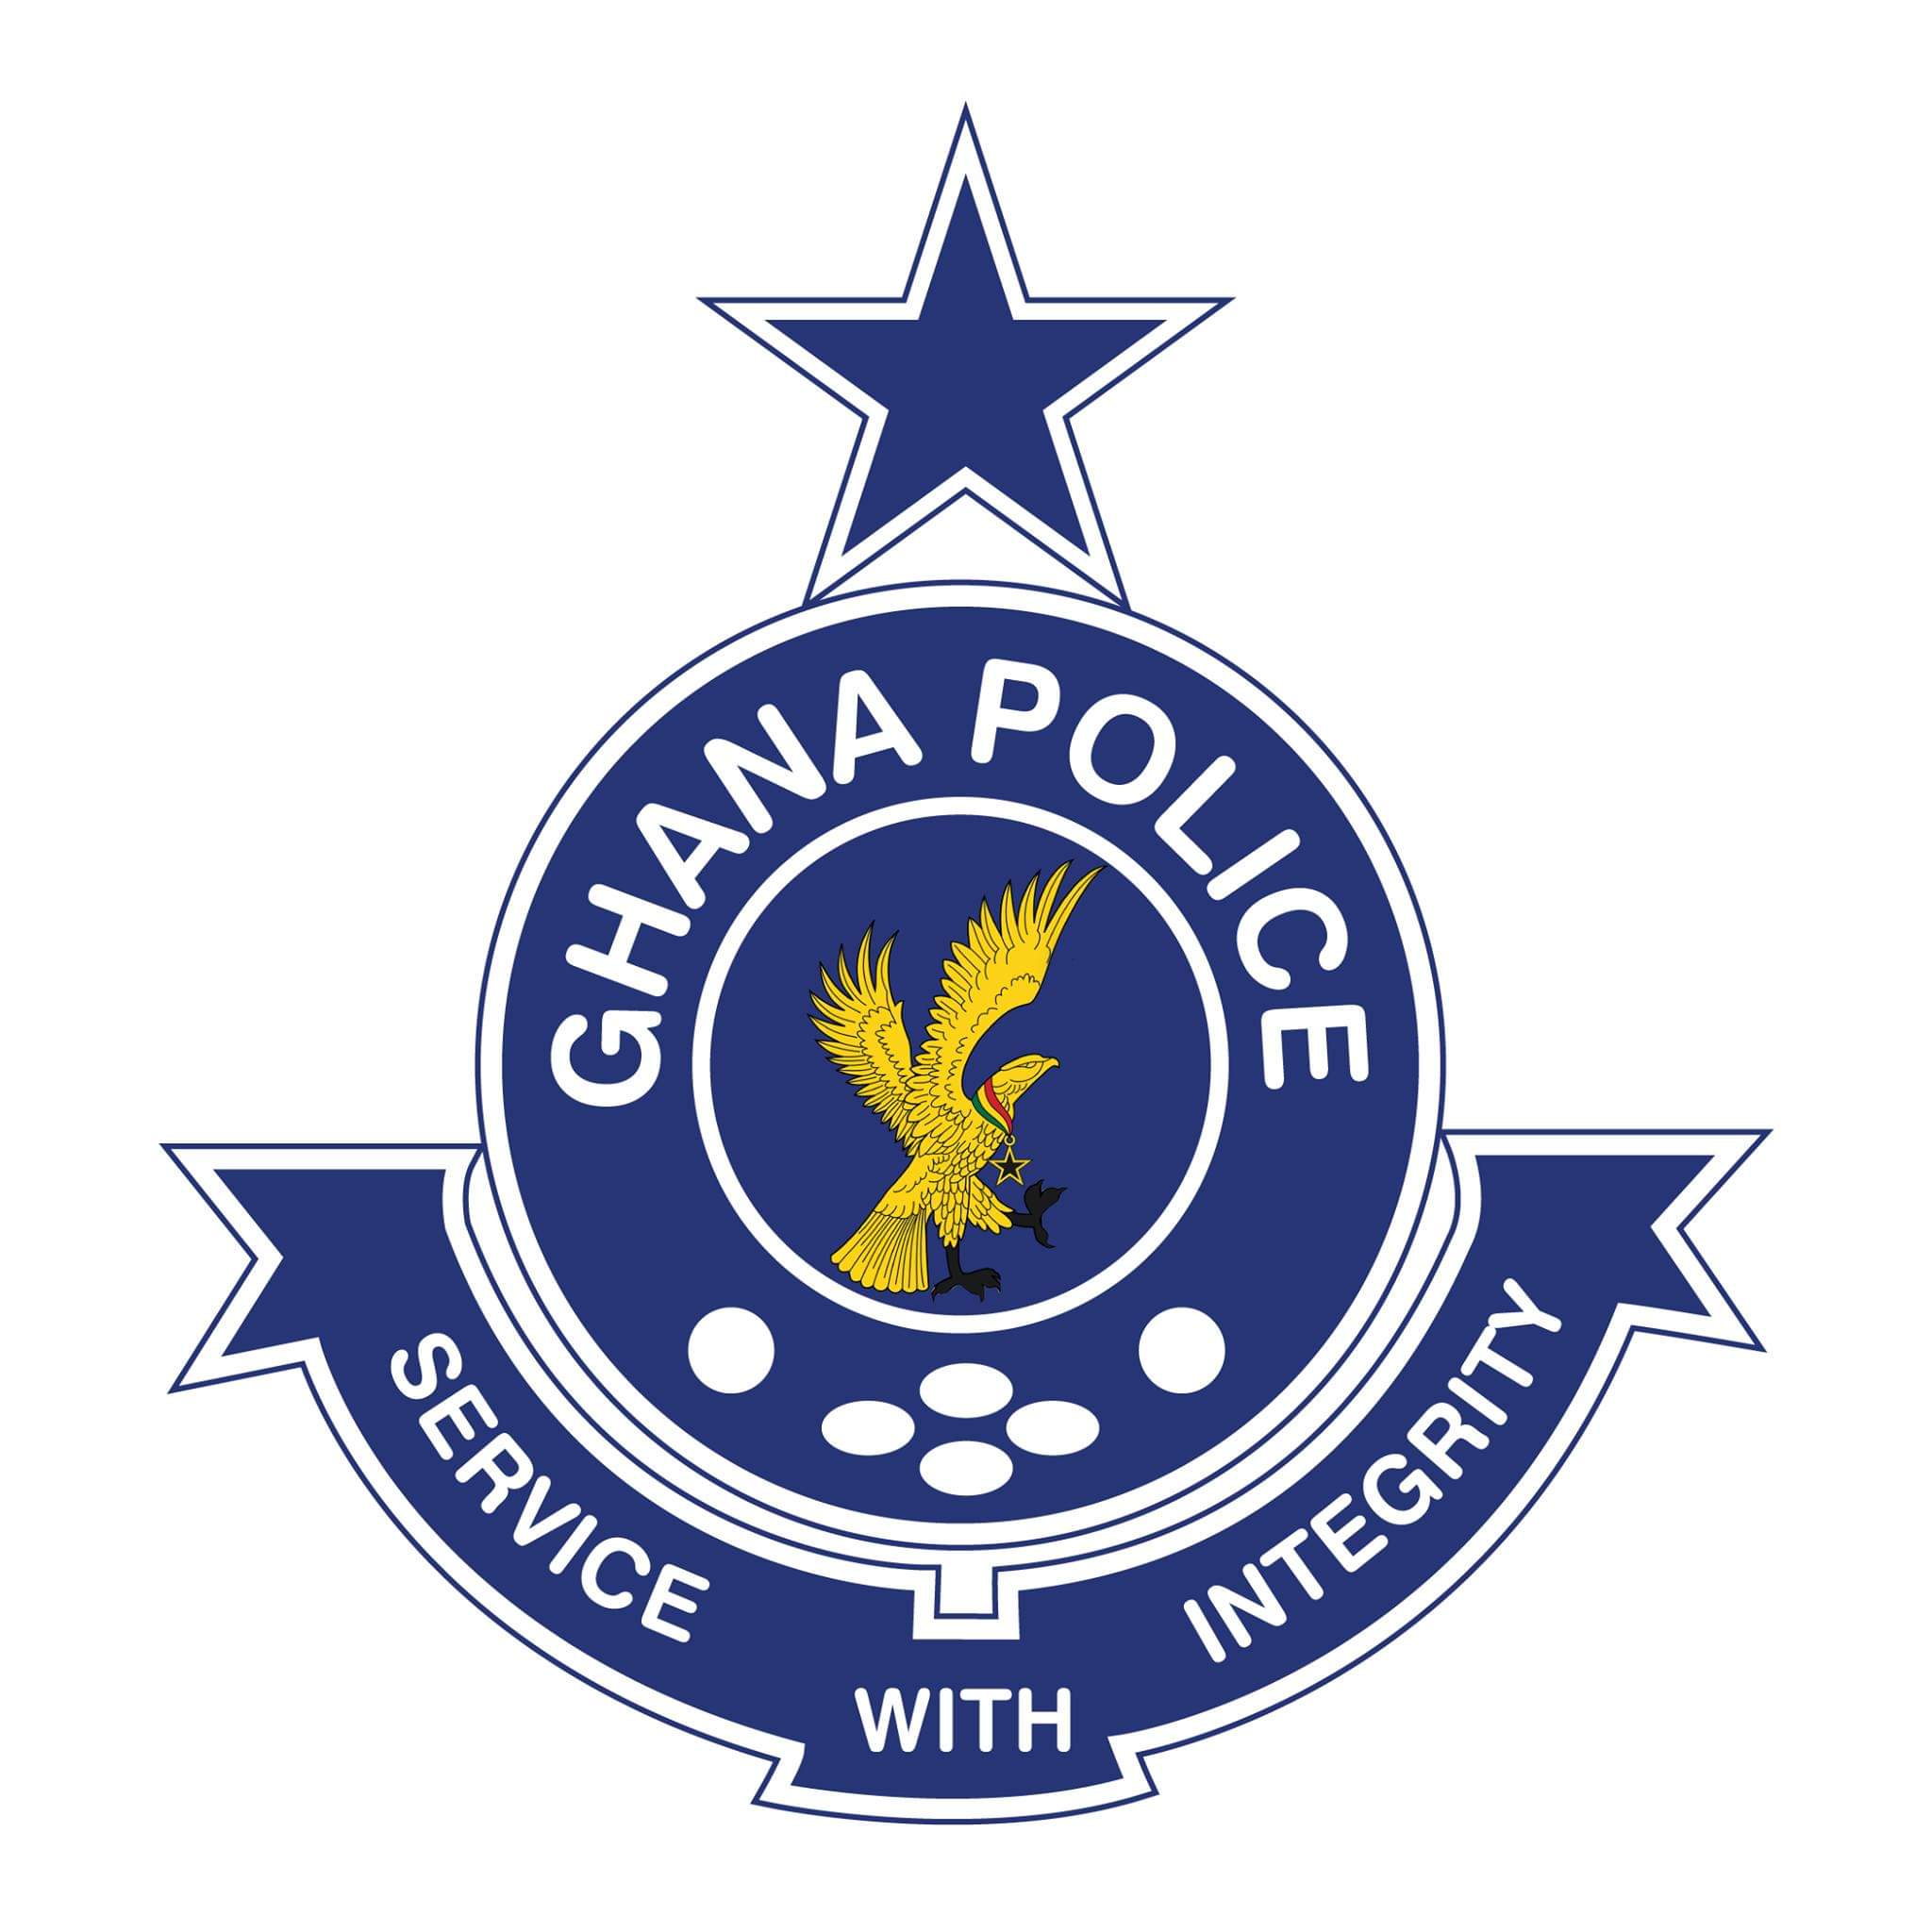 Wa flogging: 25 persons arrested for attacking Police Station